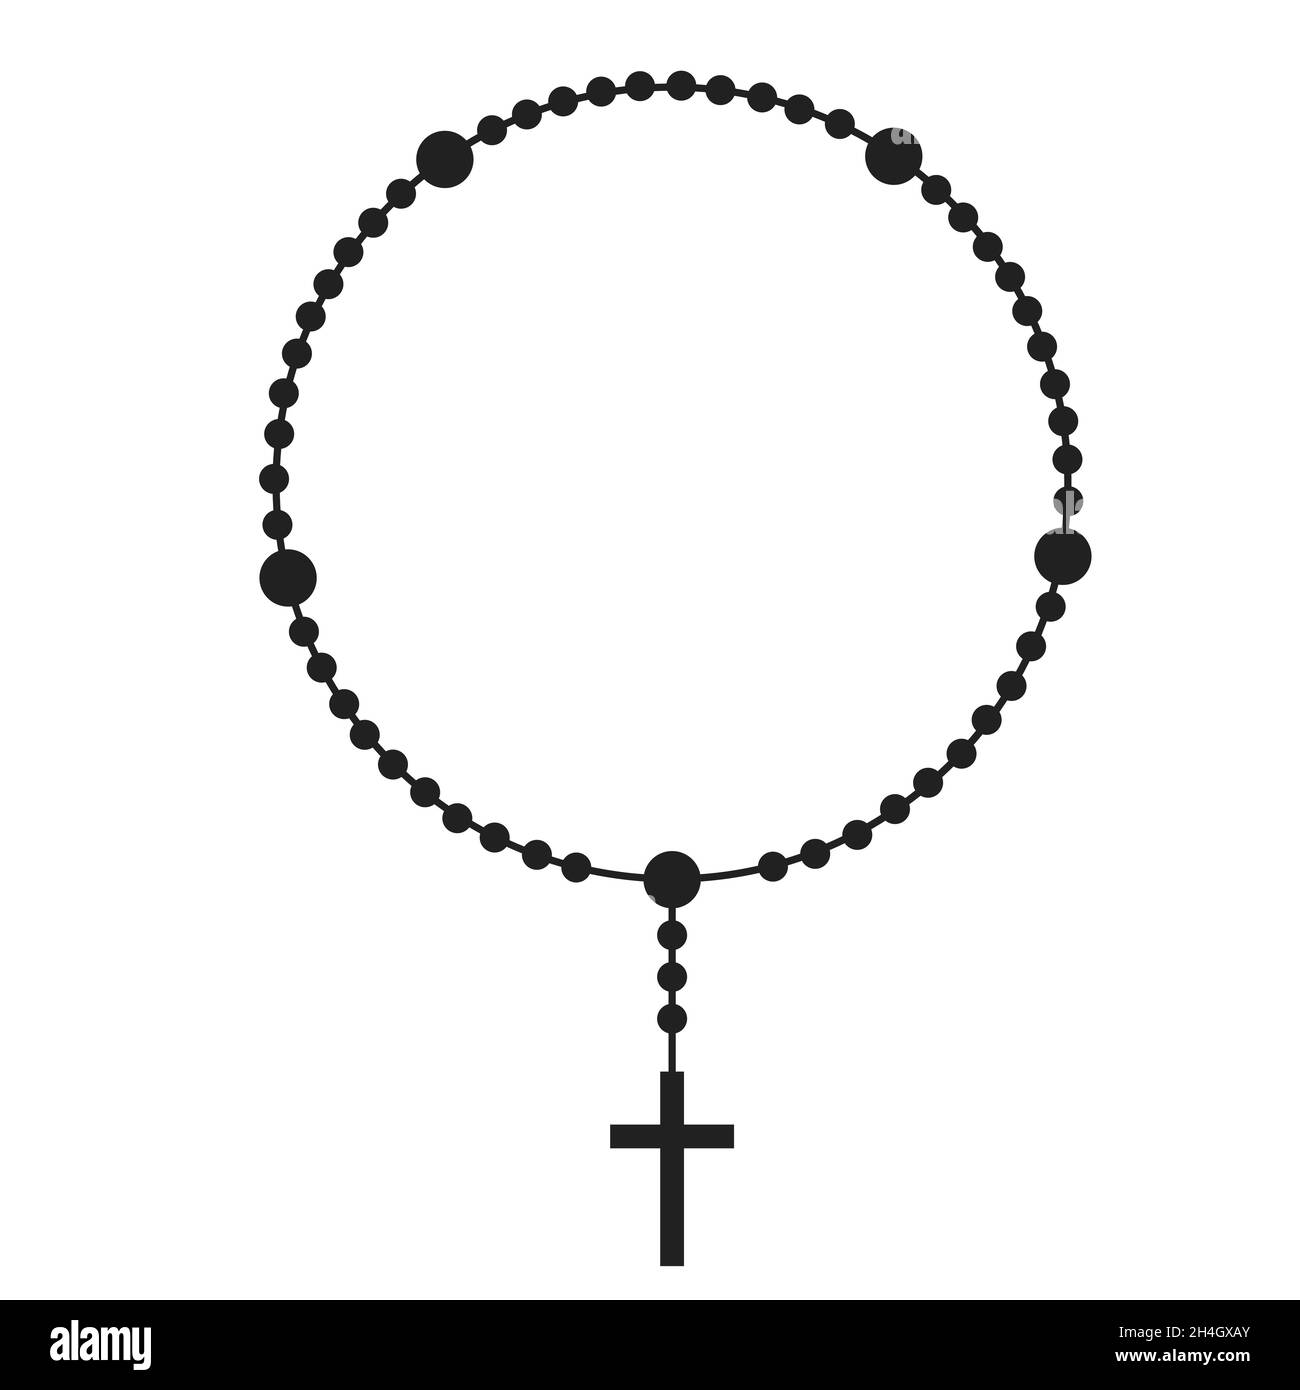 Rosary beads silhouette. Prayer jewellery for meditation. Catholic chaplet with a cross. Religion symbol. Vector isolated illustration Stock Vector